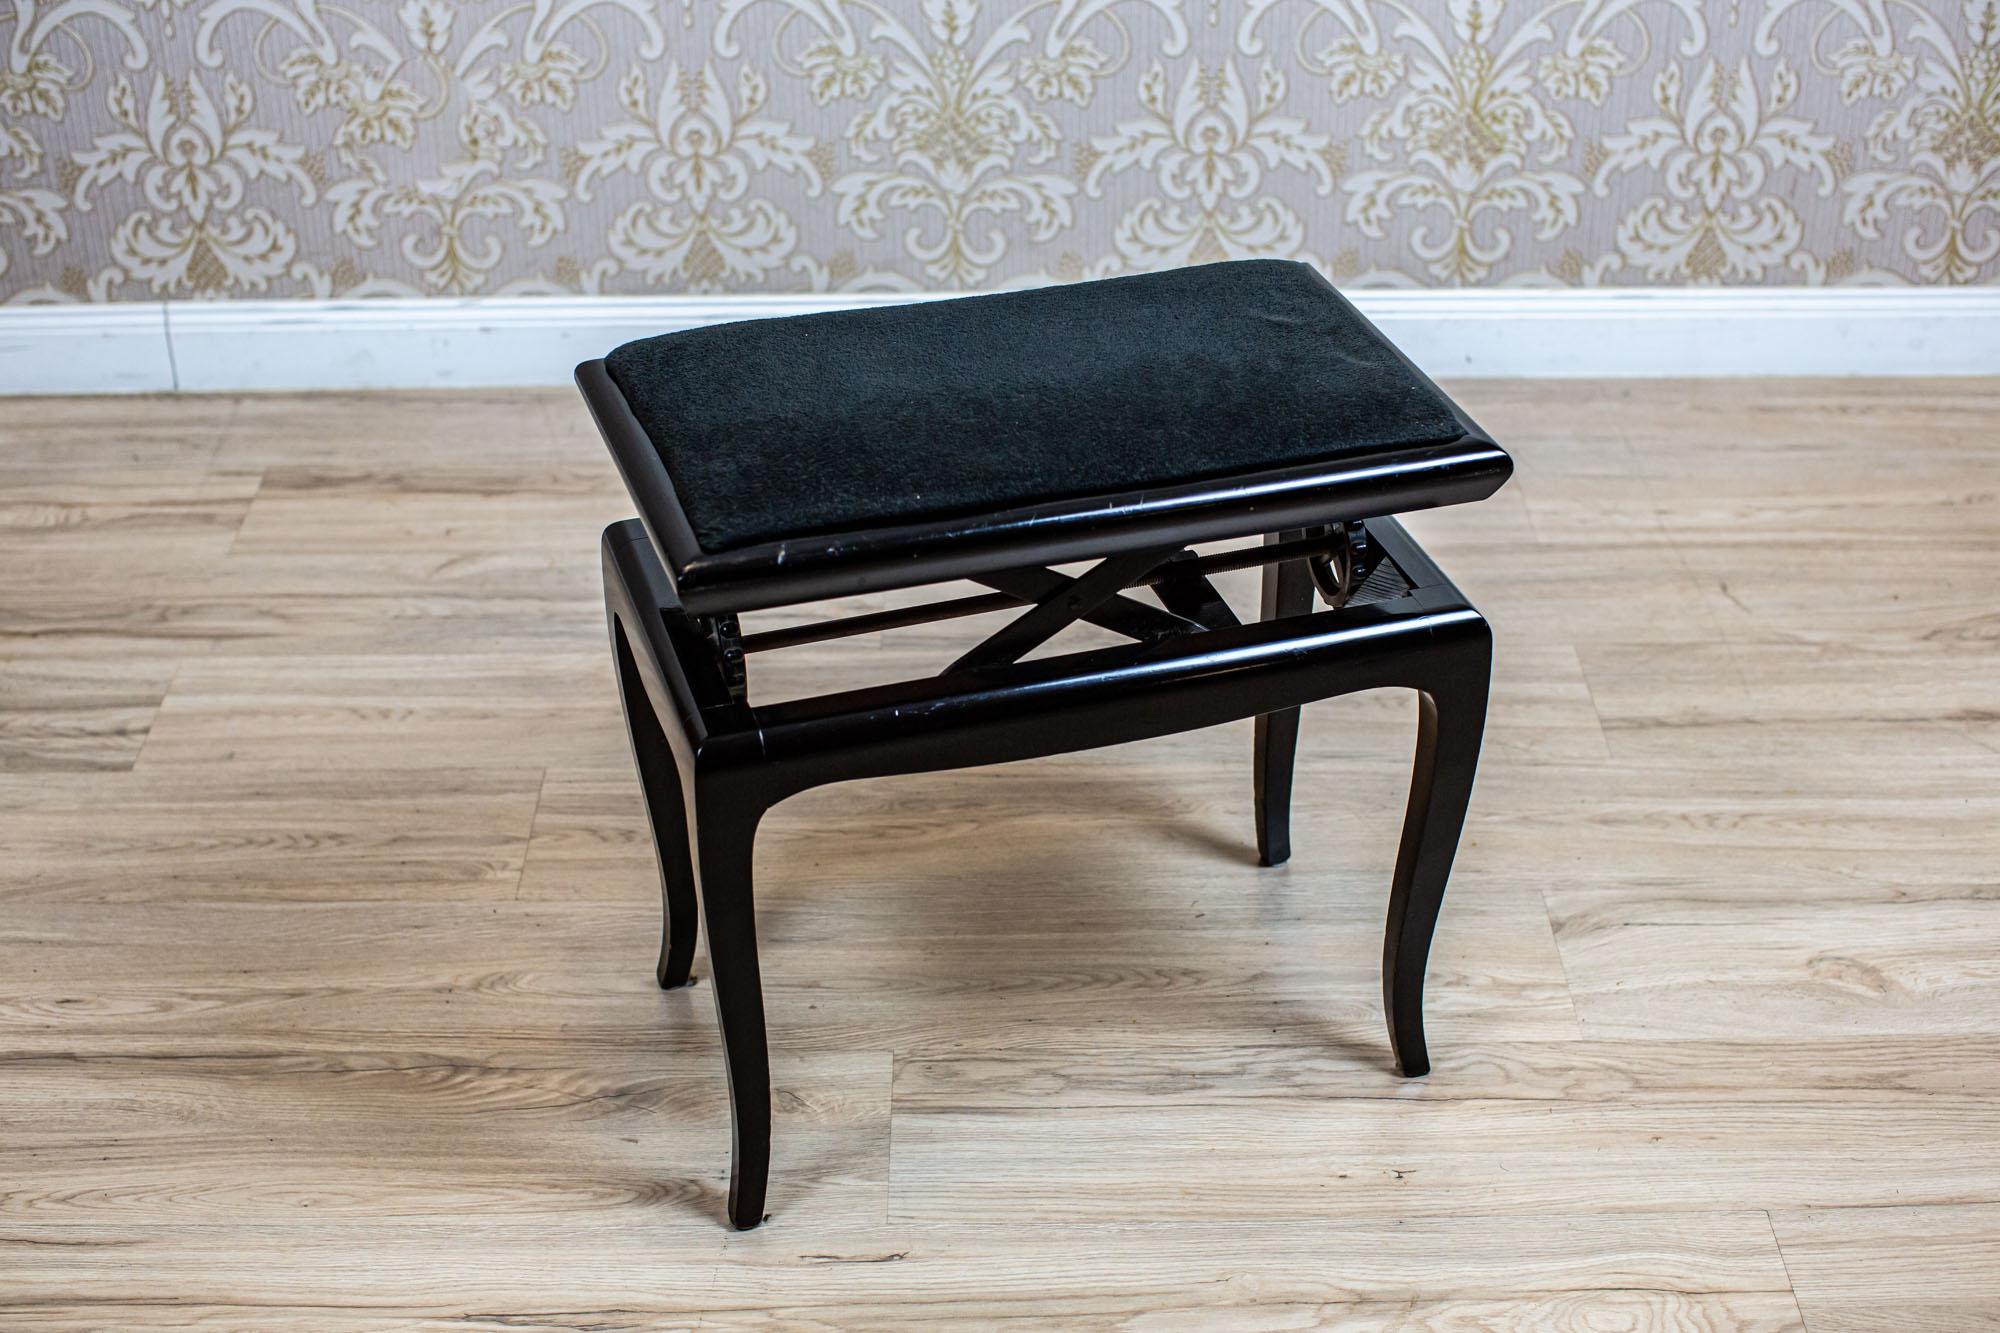 Black Piano Stool From the Early 20th Century with Upholstered Seat

A wooden stool from the early 20th century with a soft upholstered seat and adjustable height.

This piece of furniture has undergone renovation and is finished in French polish.